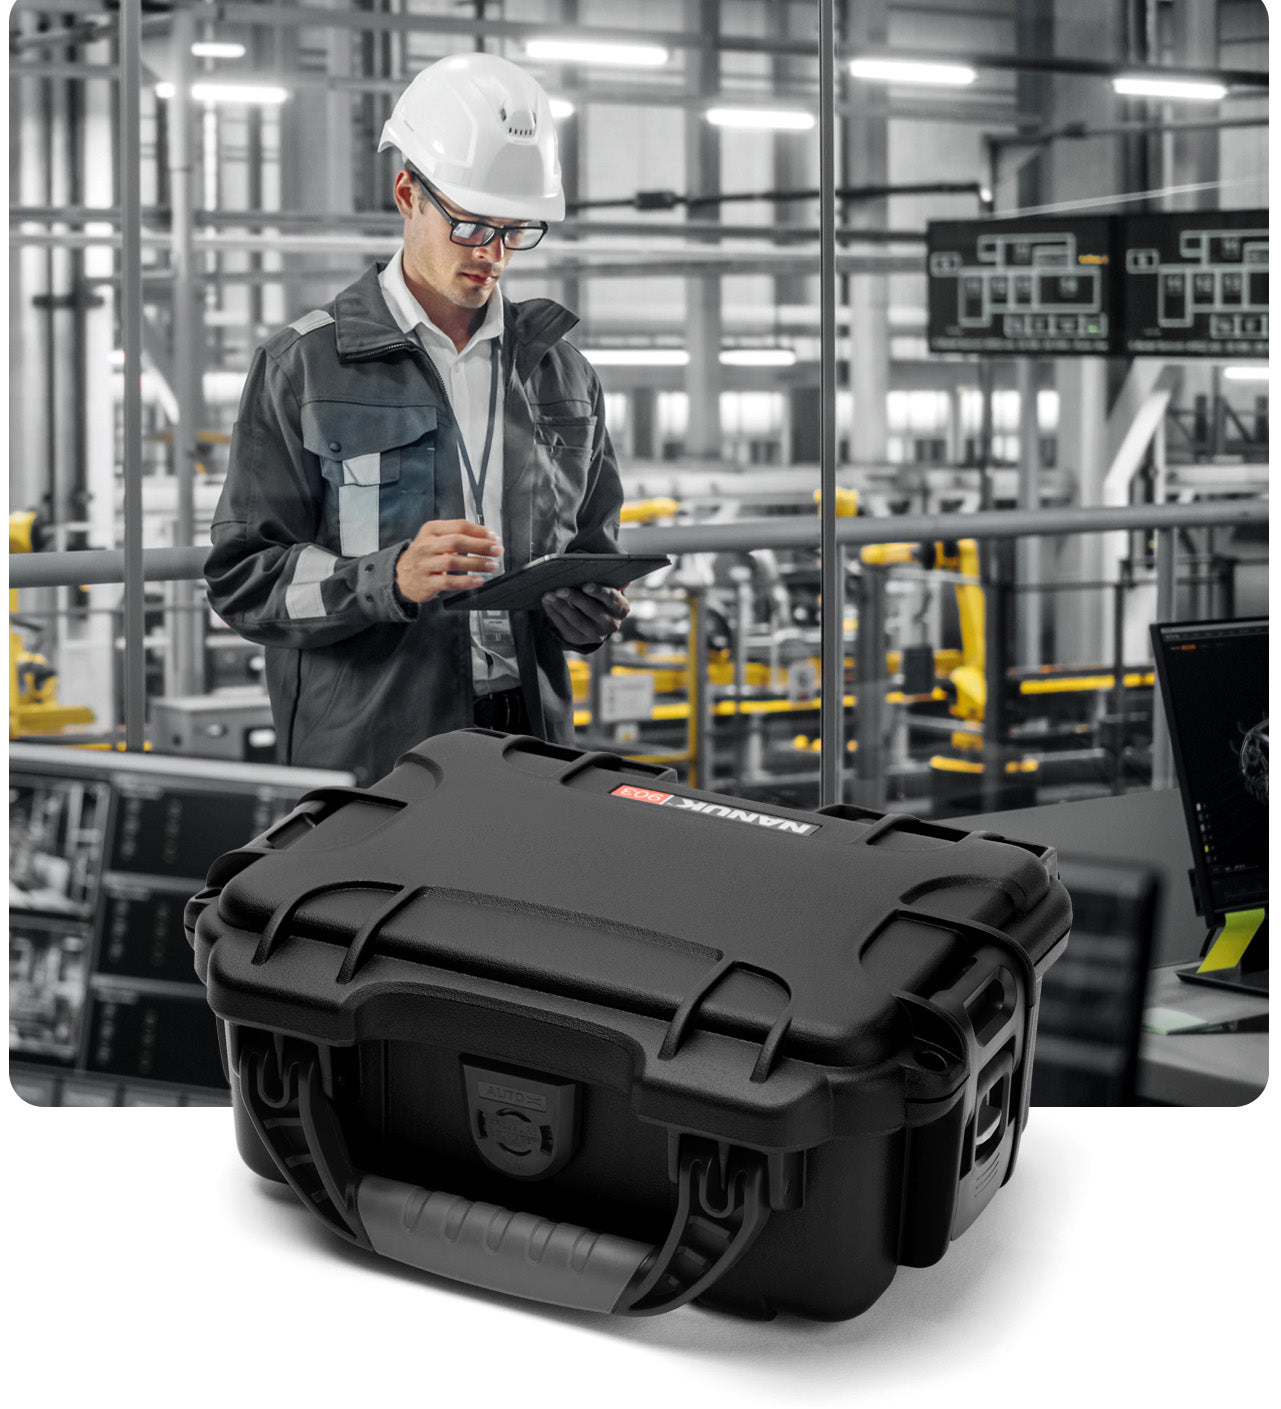 NANUK's secure cases offer industrial workers peace of mind by safeguarding equipment, ensuring accessibility, and allowing uninterrupted focus on project completion.